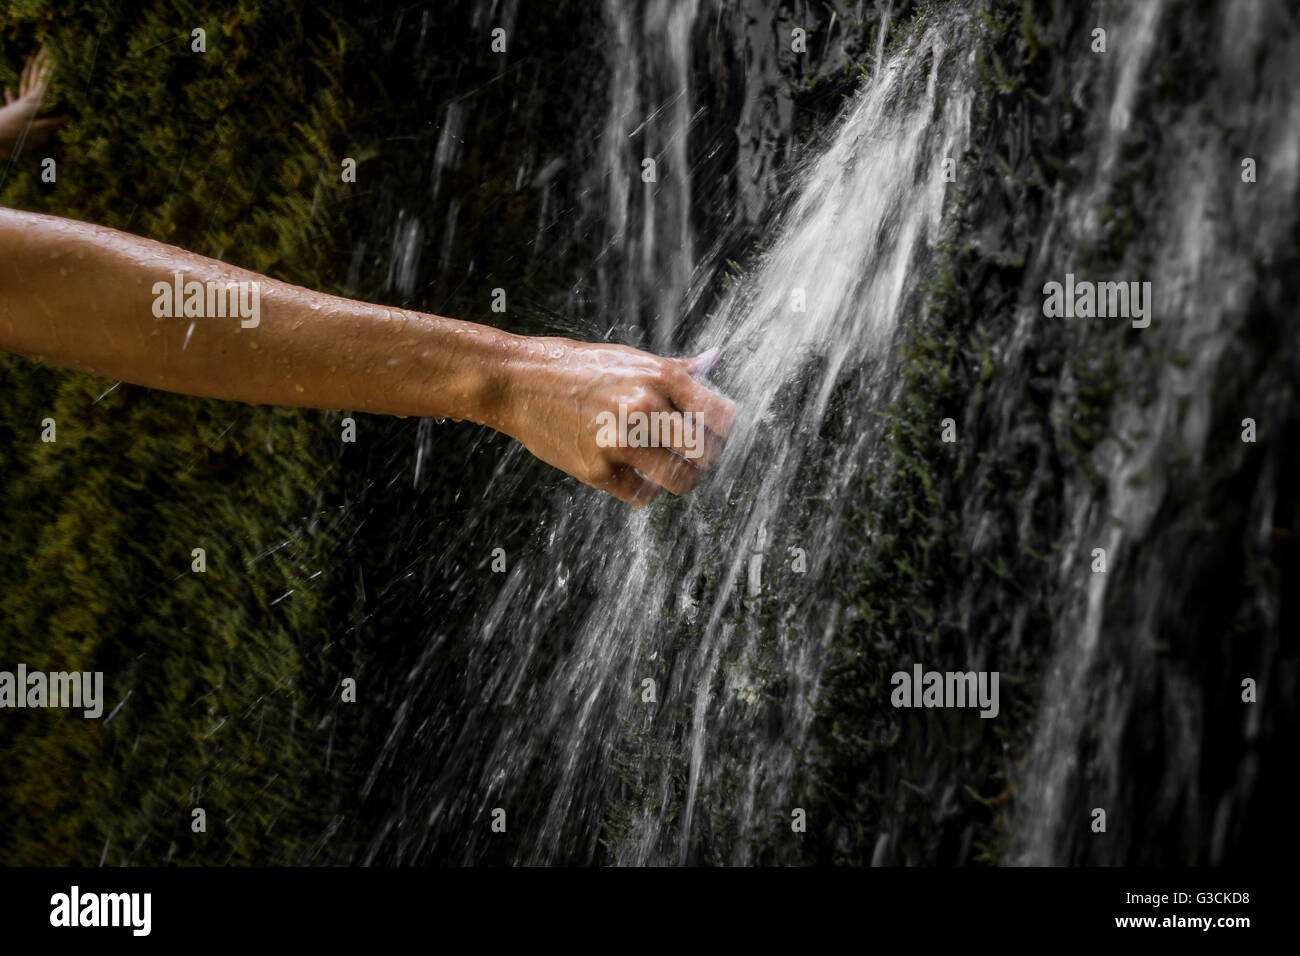 Waterfall Weißenbronnen, girl holding hand in the water, district Ravensburg, Baden-Württemberg, Germany, moss, water, light reflections, Stock Photo